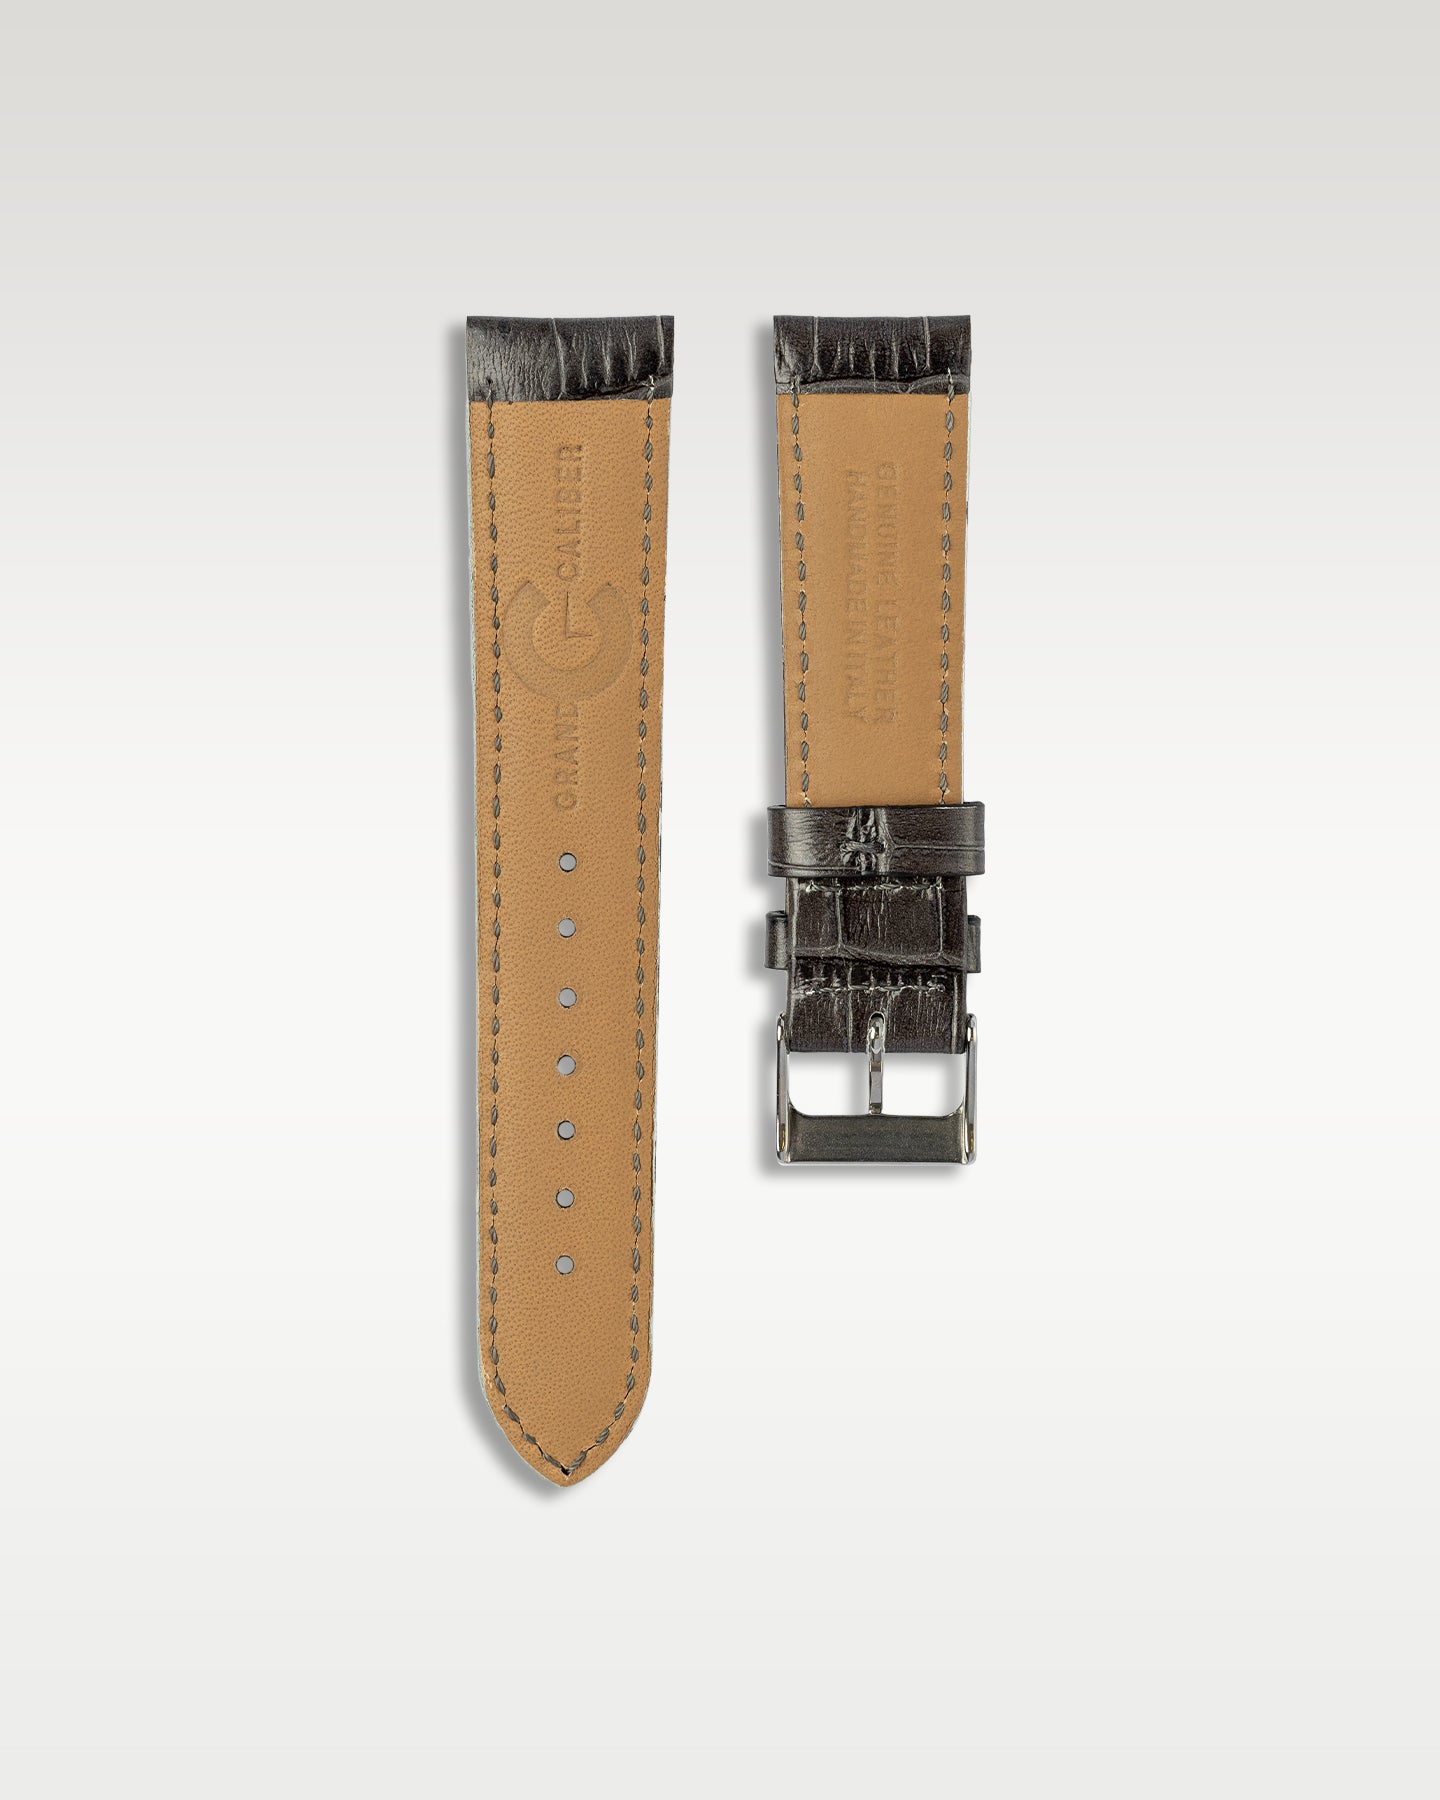 Handmade Alligator Leather Strap in Charcoal Grey